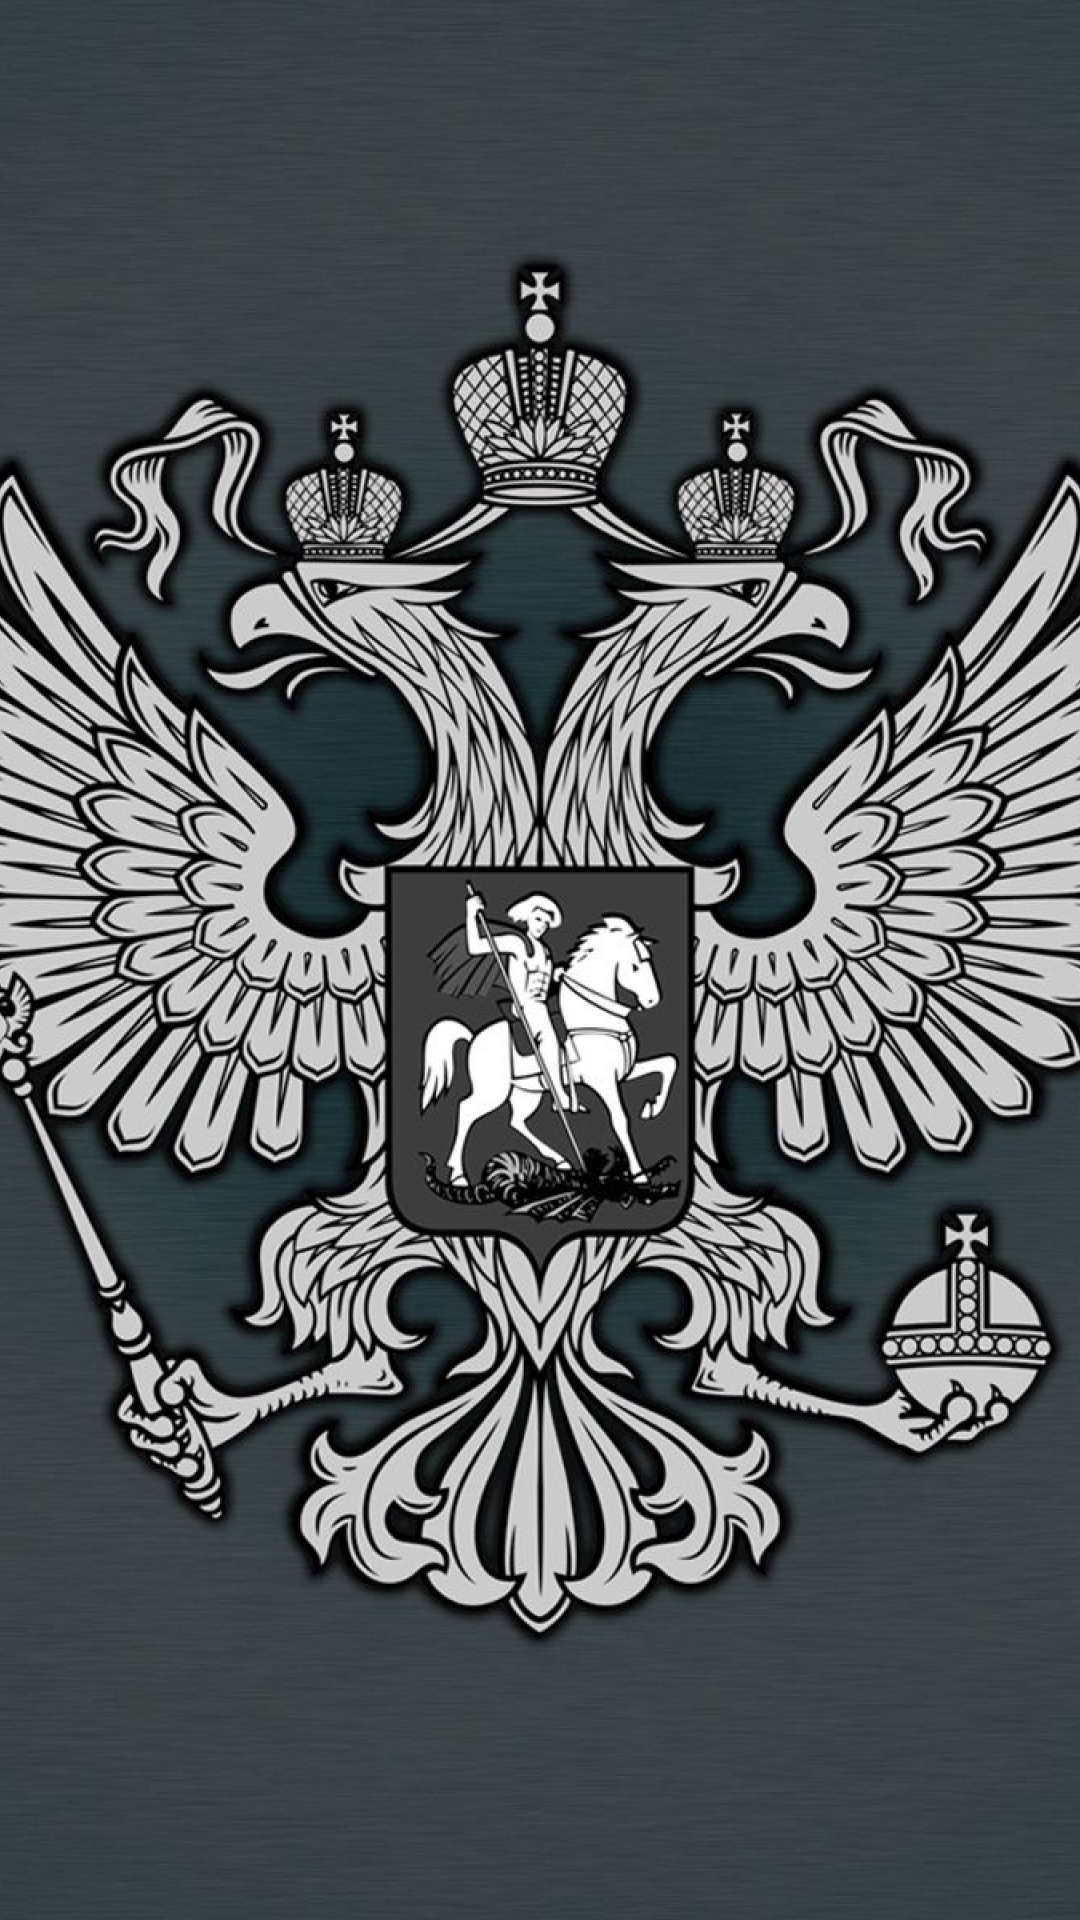 Das Coat of arms of Russia Wallpaper 1080x1920